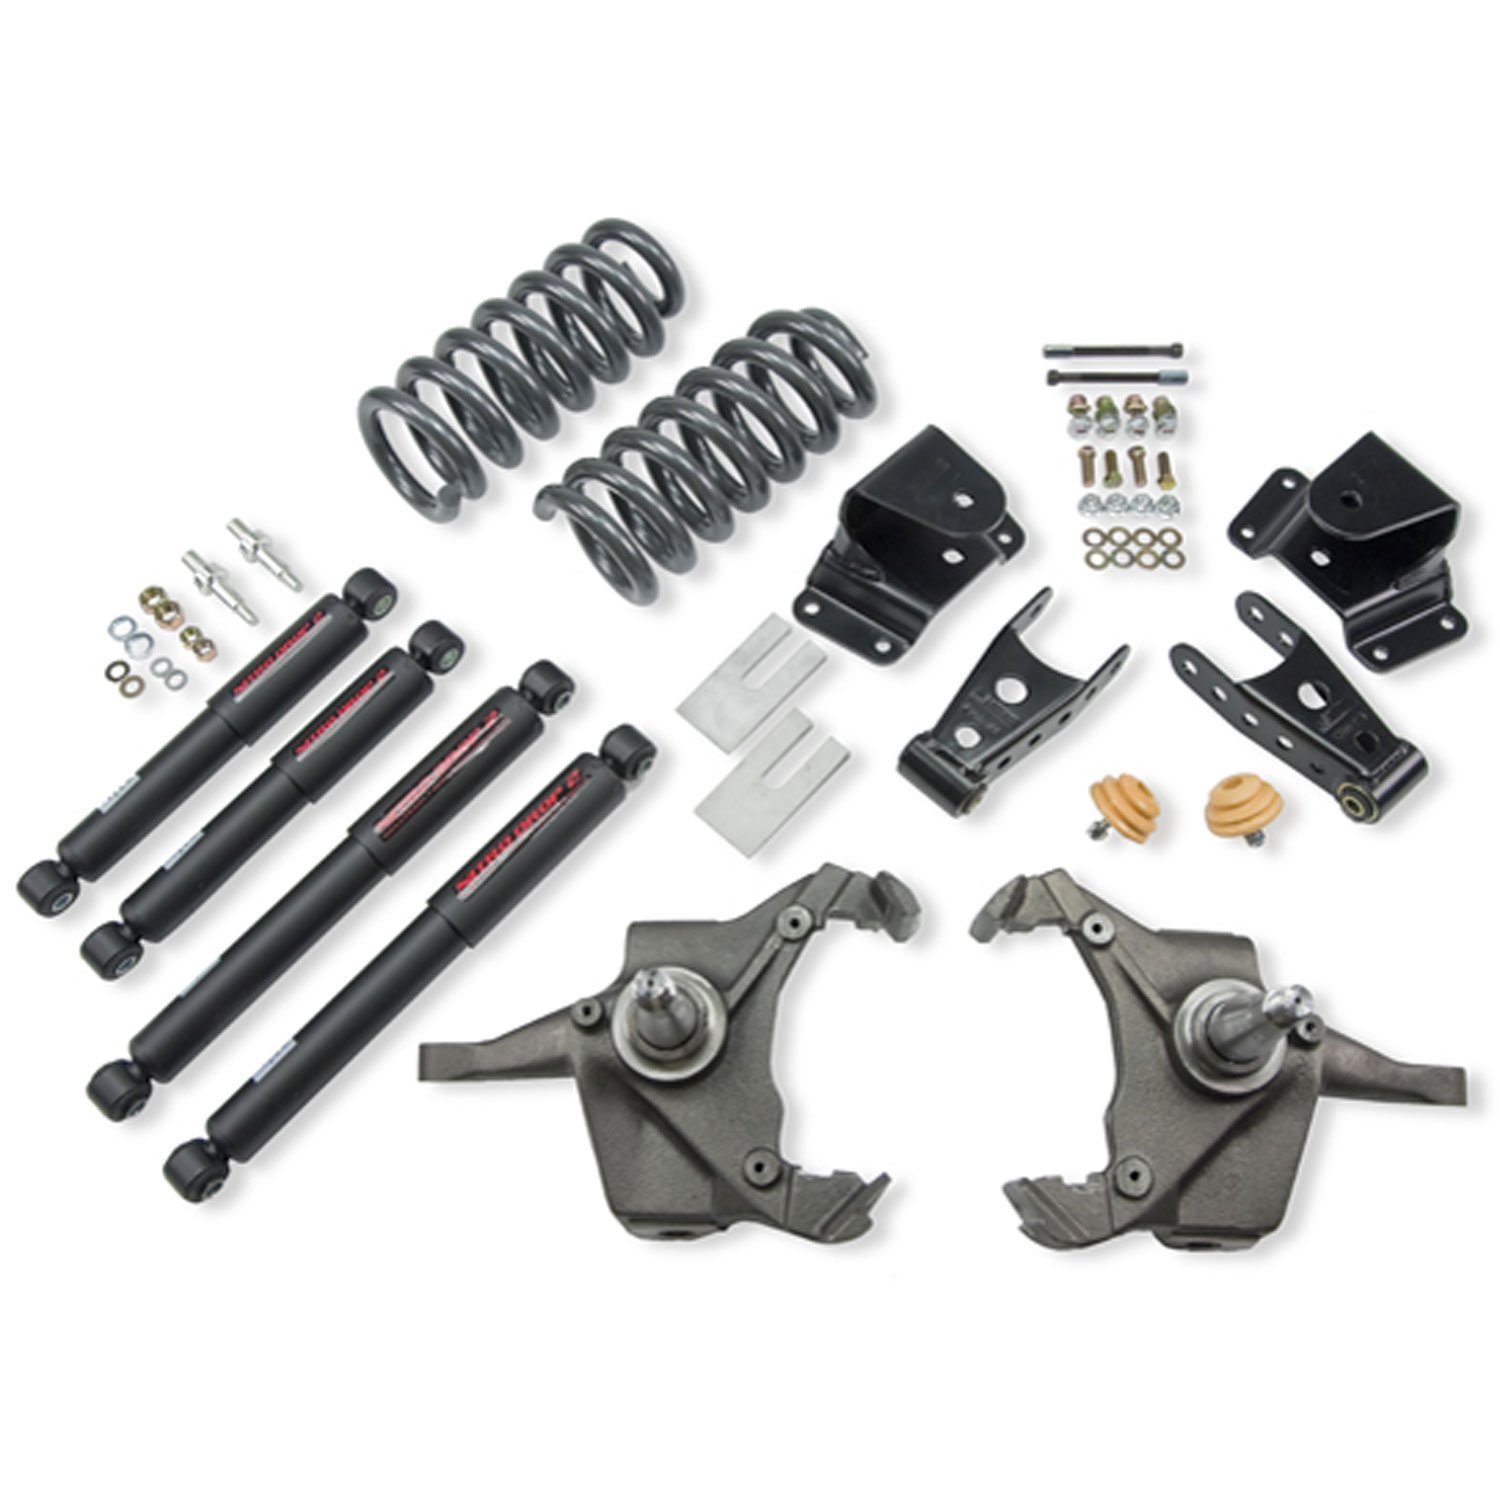 Complete Lowering Kit for 1975-1991 Chevy/GMC 1 Ton Pickup